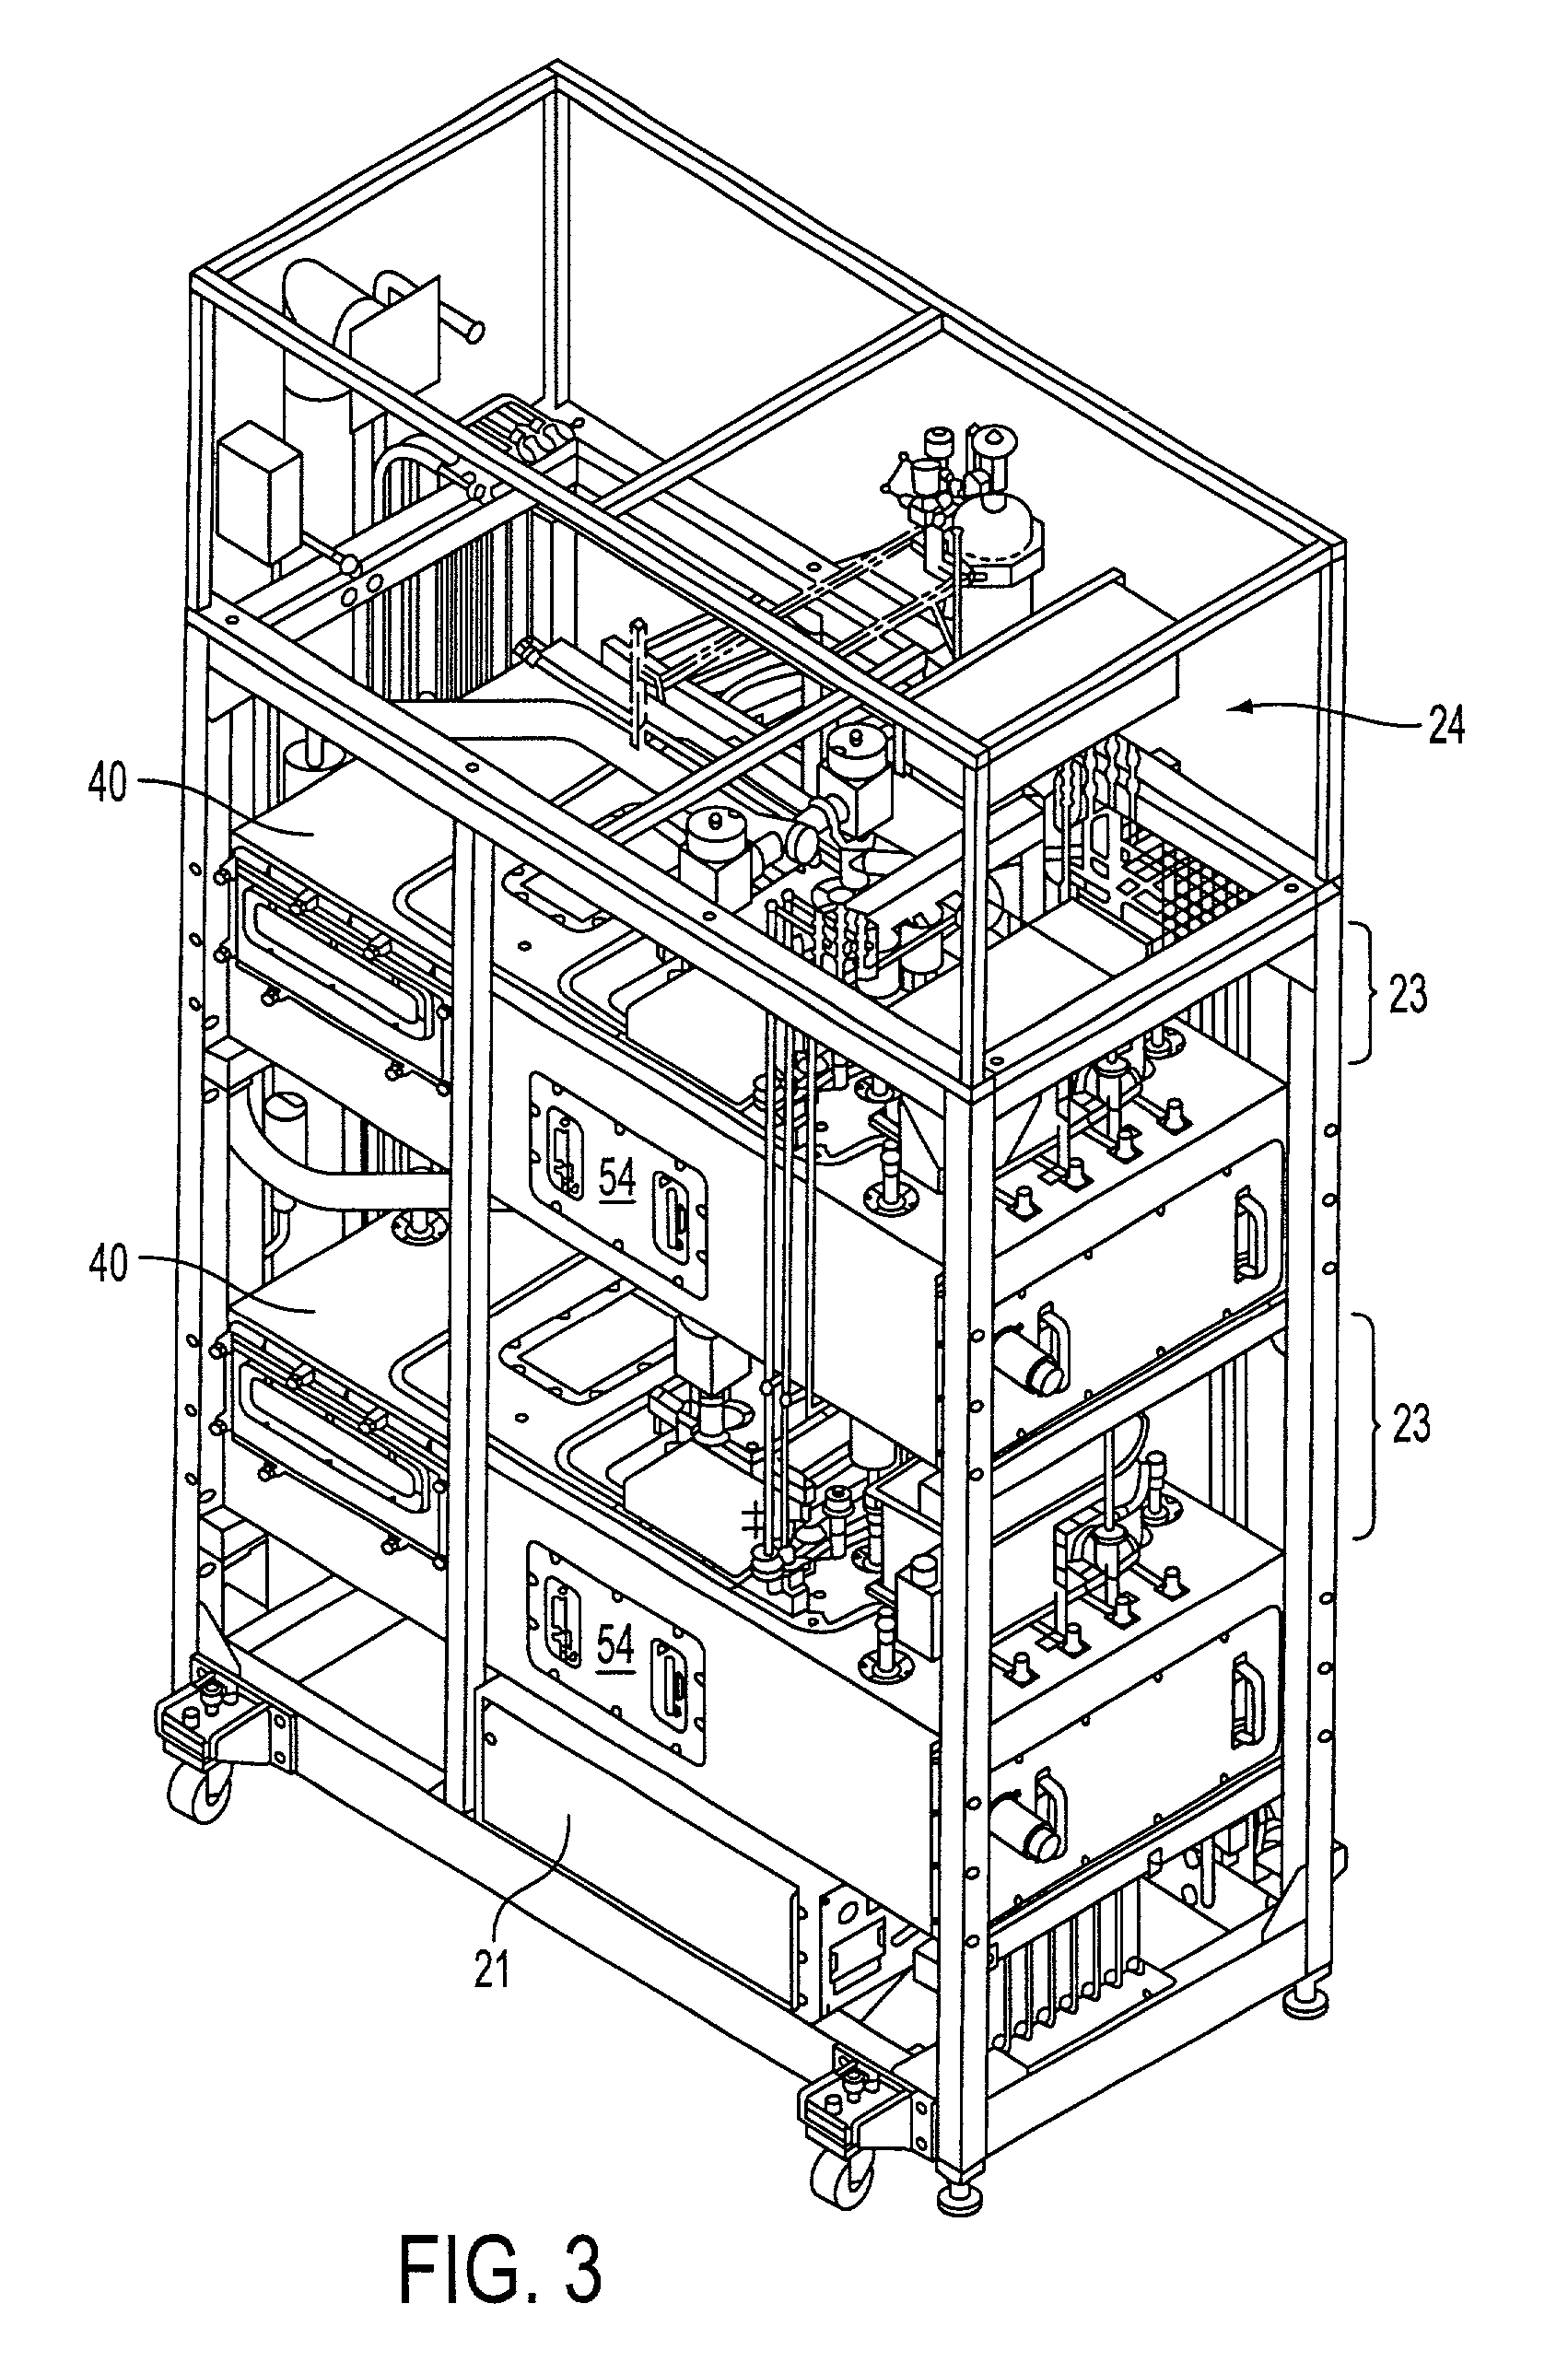 Semiconductor wafer processing system with vertically-stacked process chambers and single-axis dual-wafer transfer system